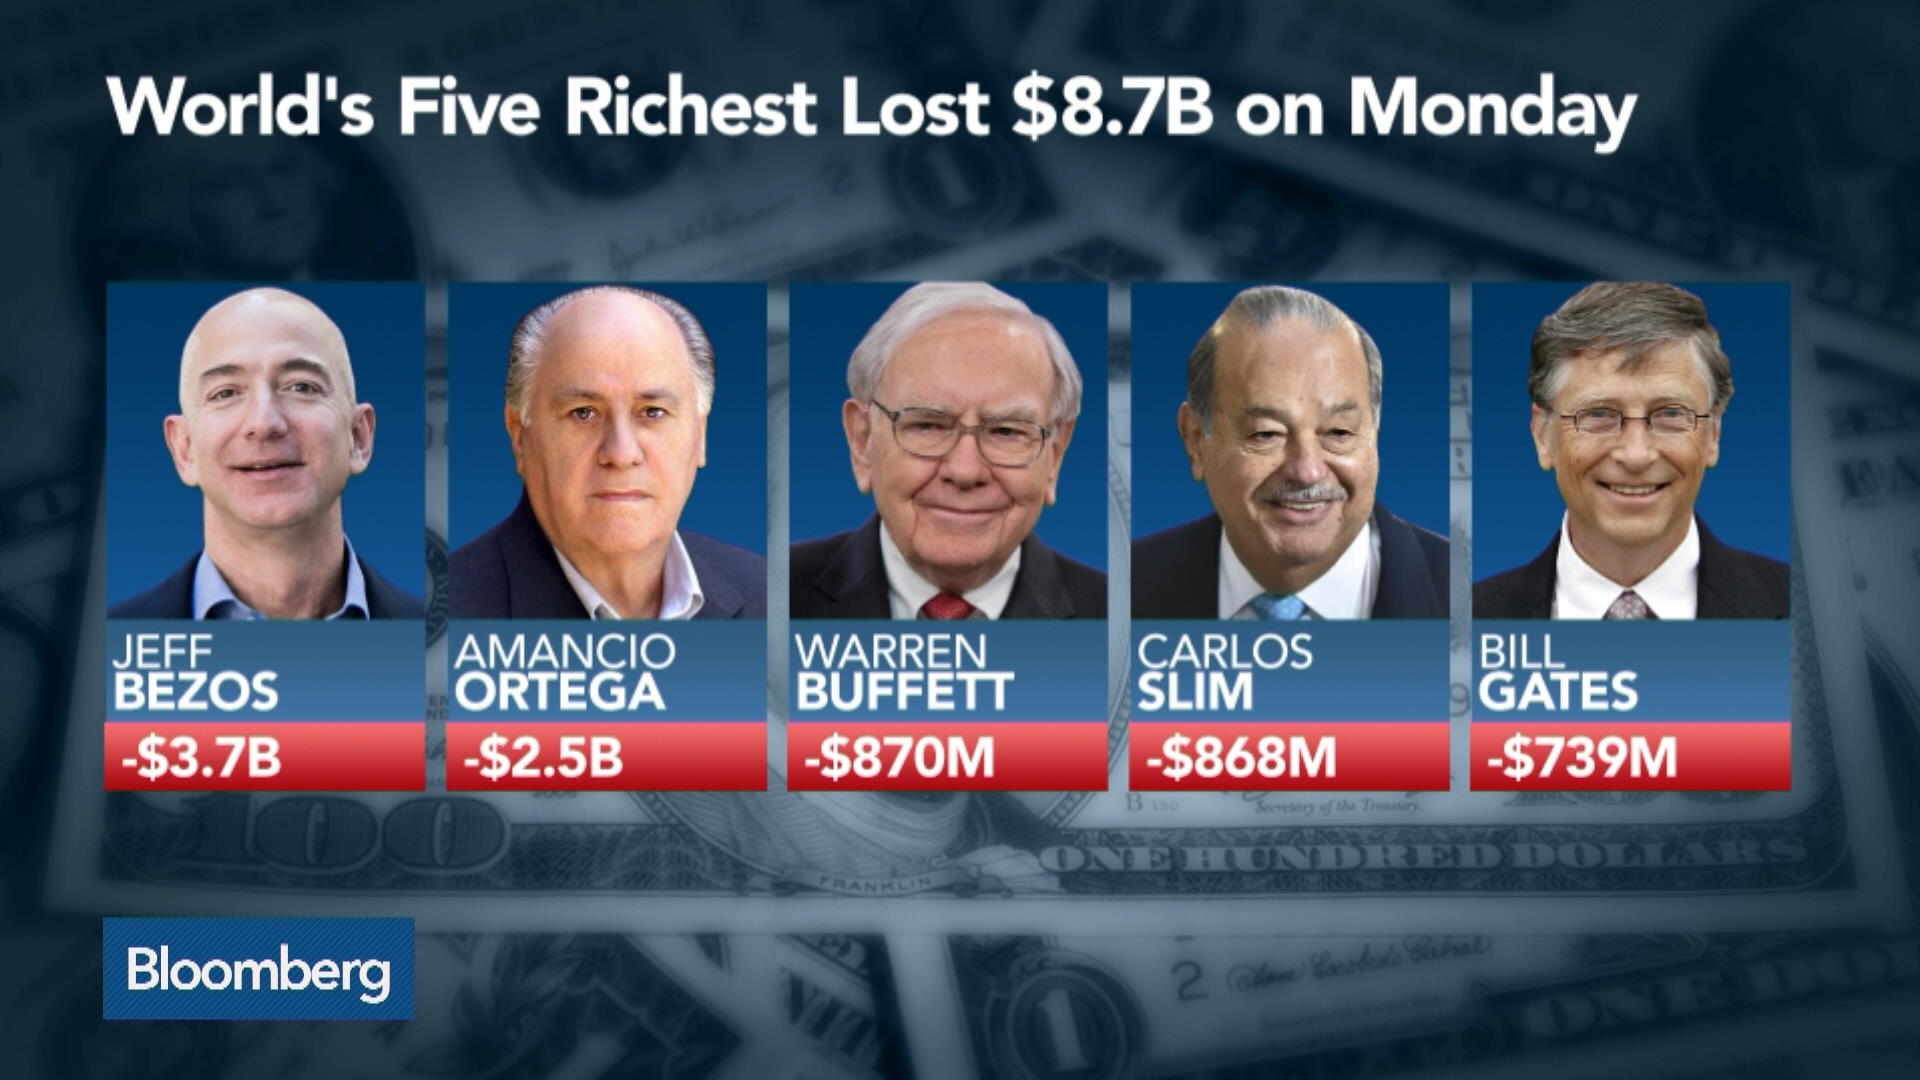 The World's Five Richest People Lost $8.7 Billion in Monday's Bloomberg